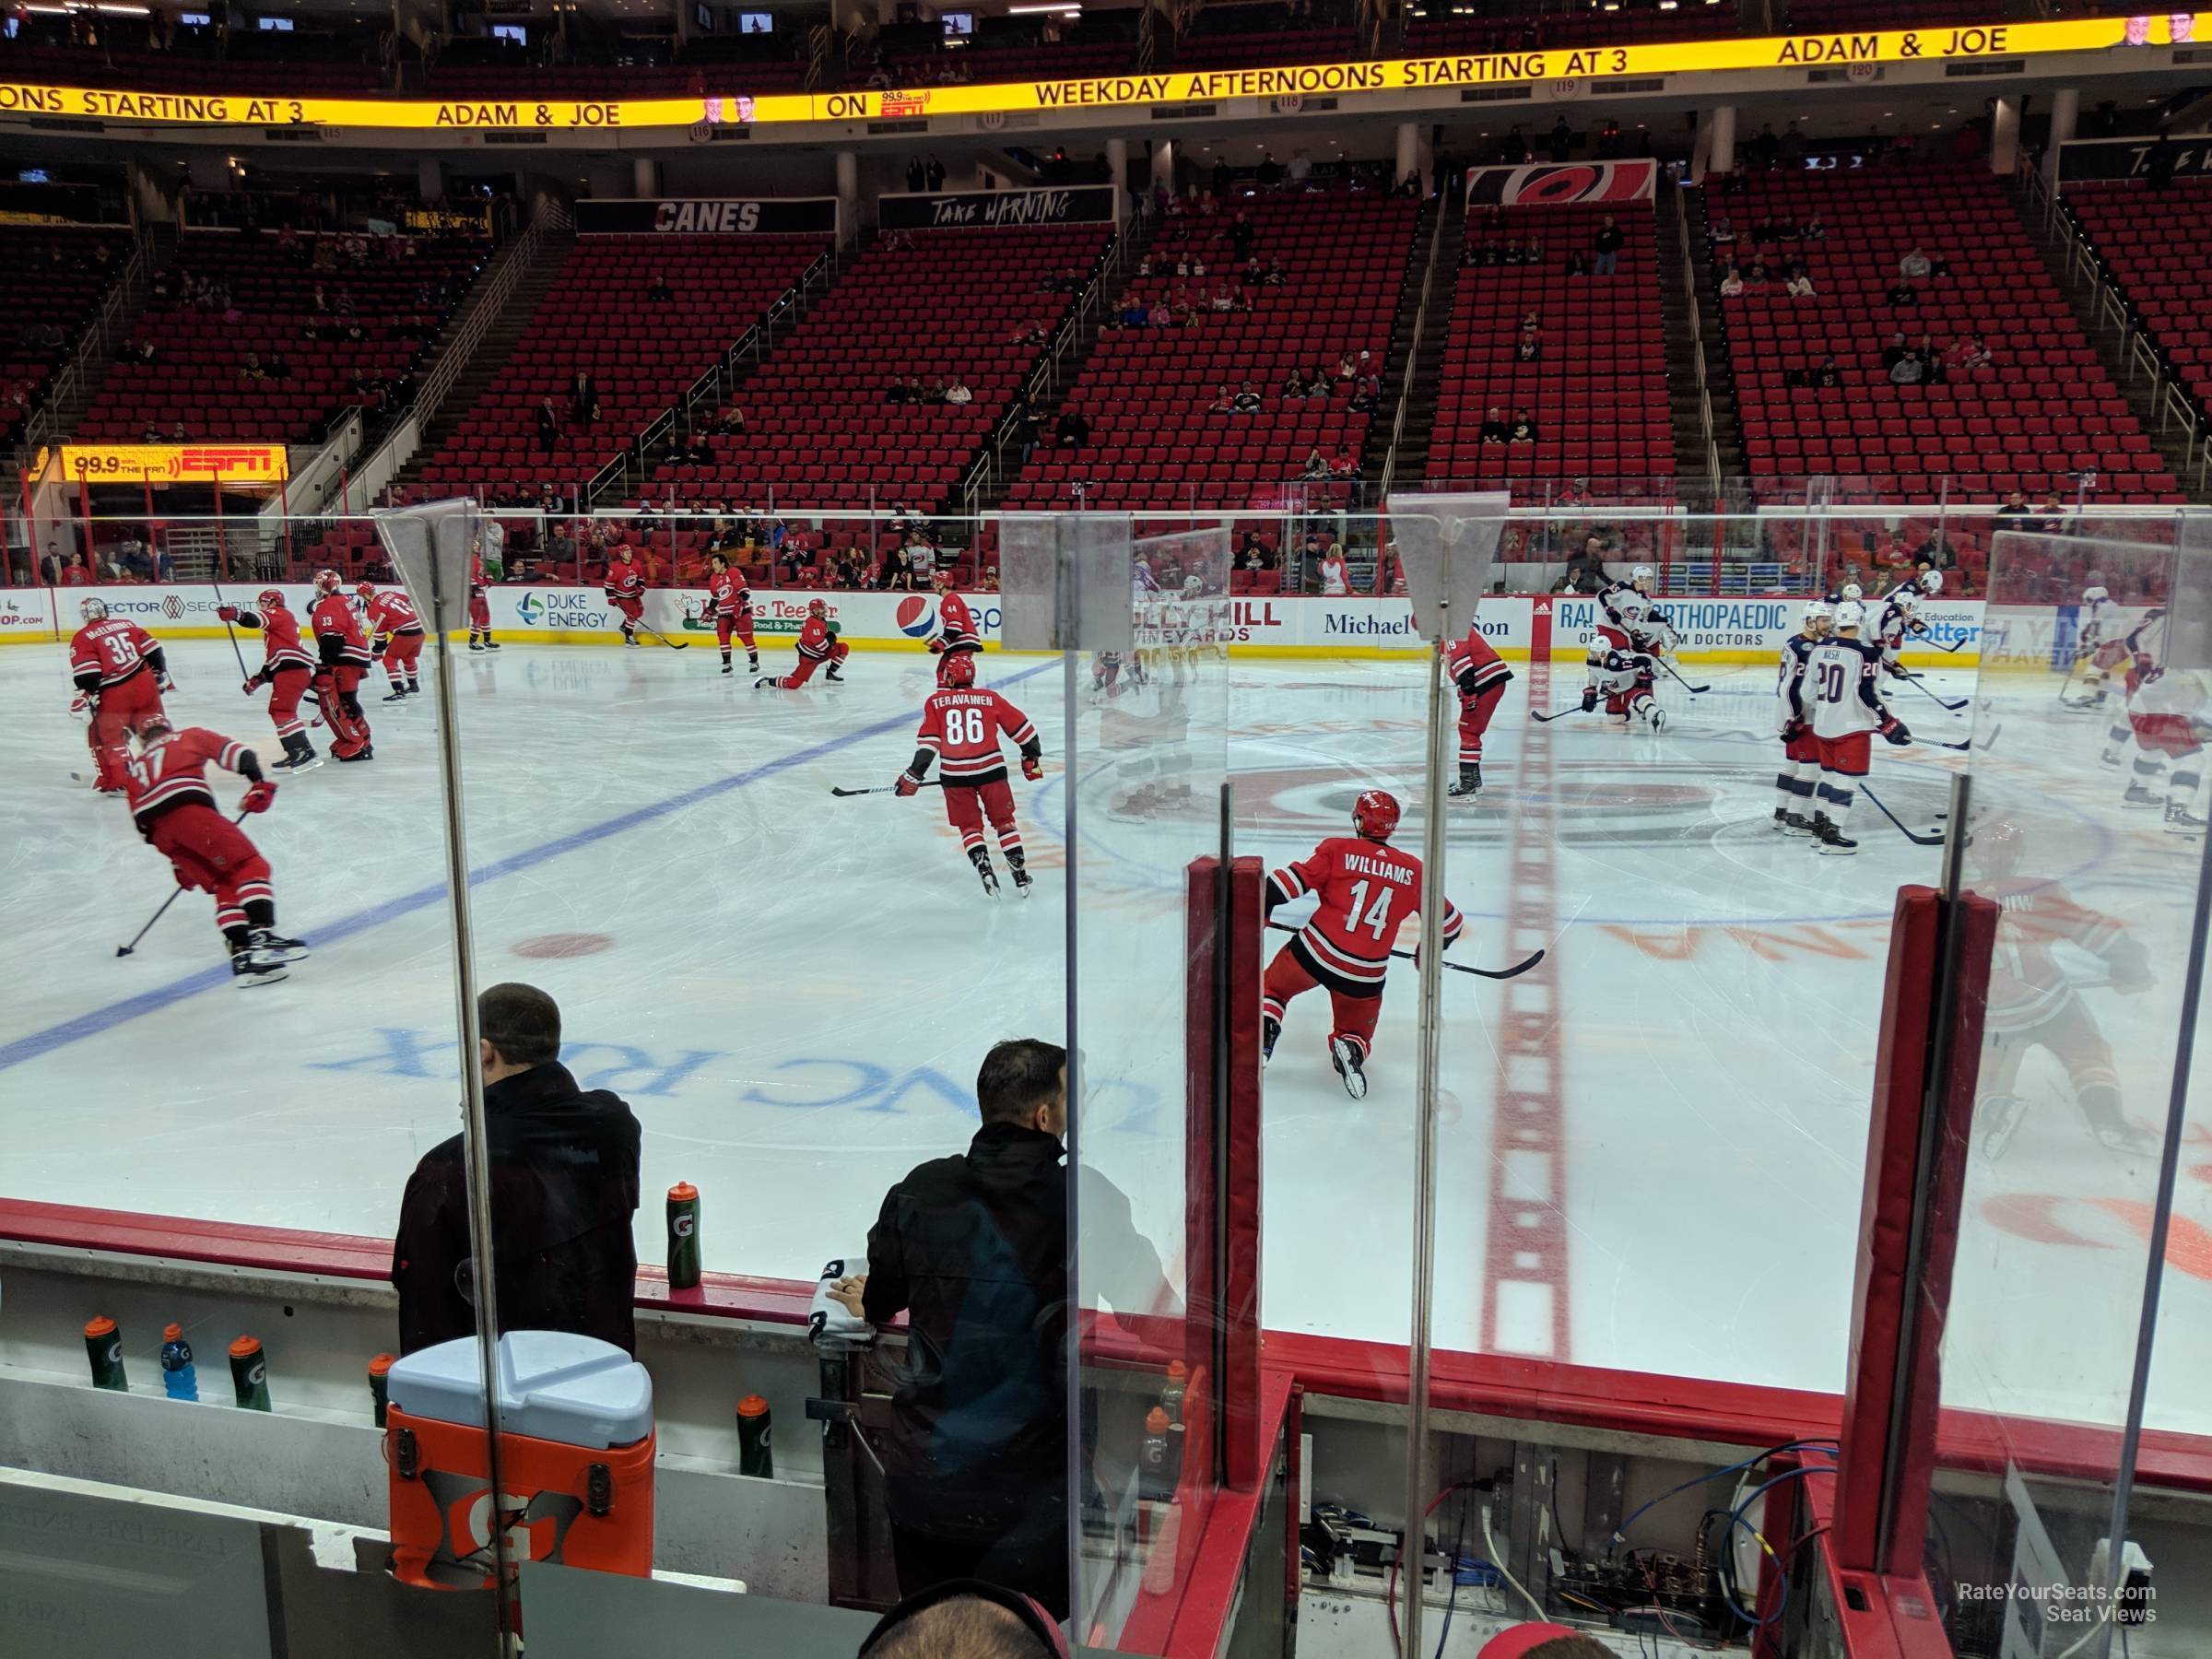 section 104, row e seat view  for hockey - pnc arena